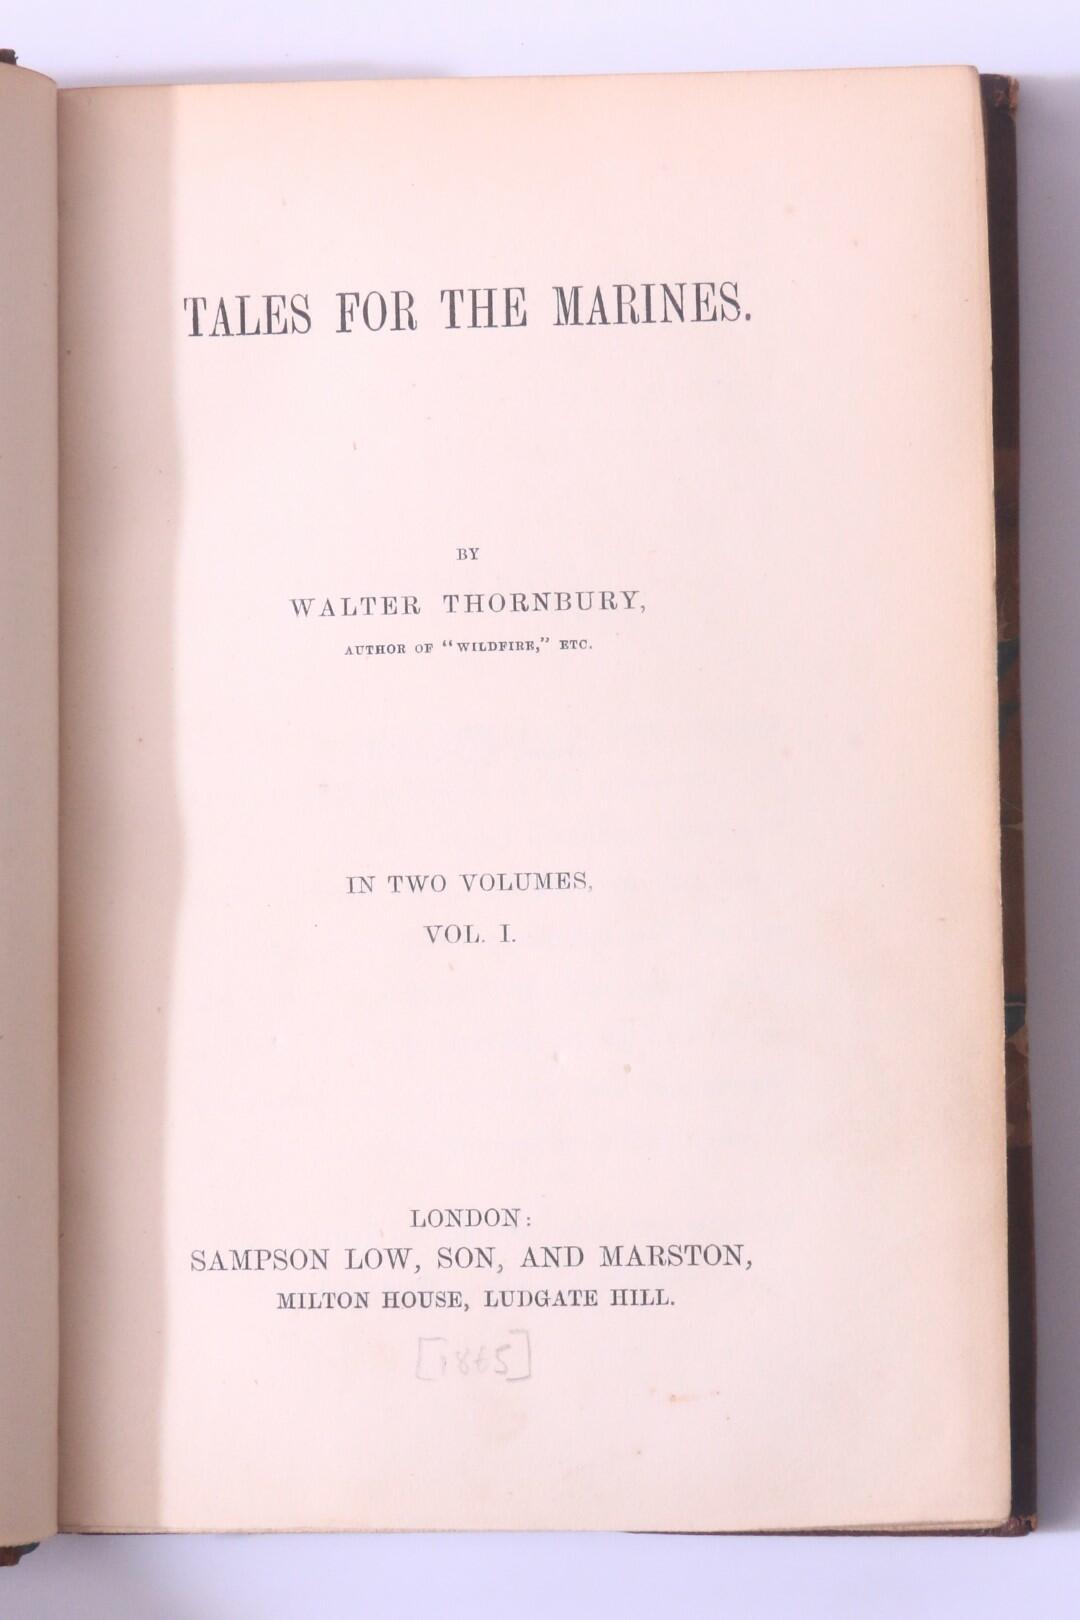 [George] Walter Thornbury - Tales for the Marines - Sampson Low, Son and Marston, nd [1865], First Edition.